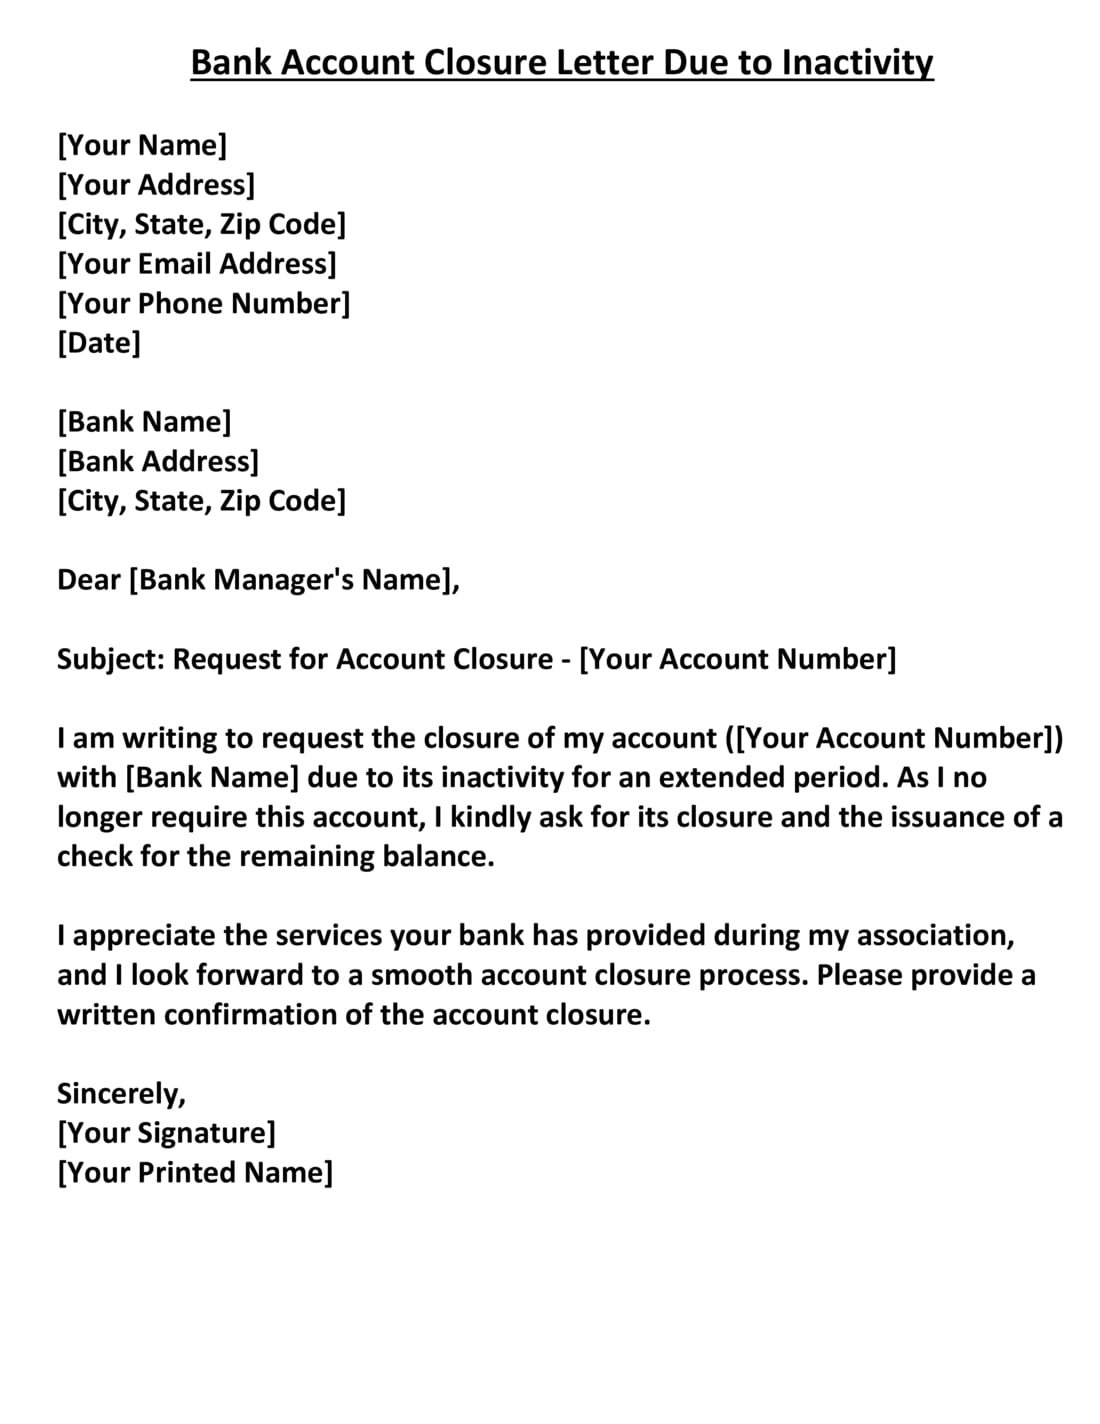 Bank Account Closure Letter Due to Inactivity